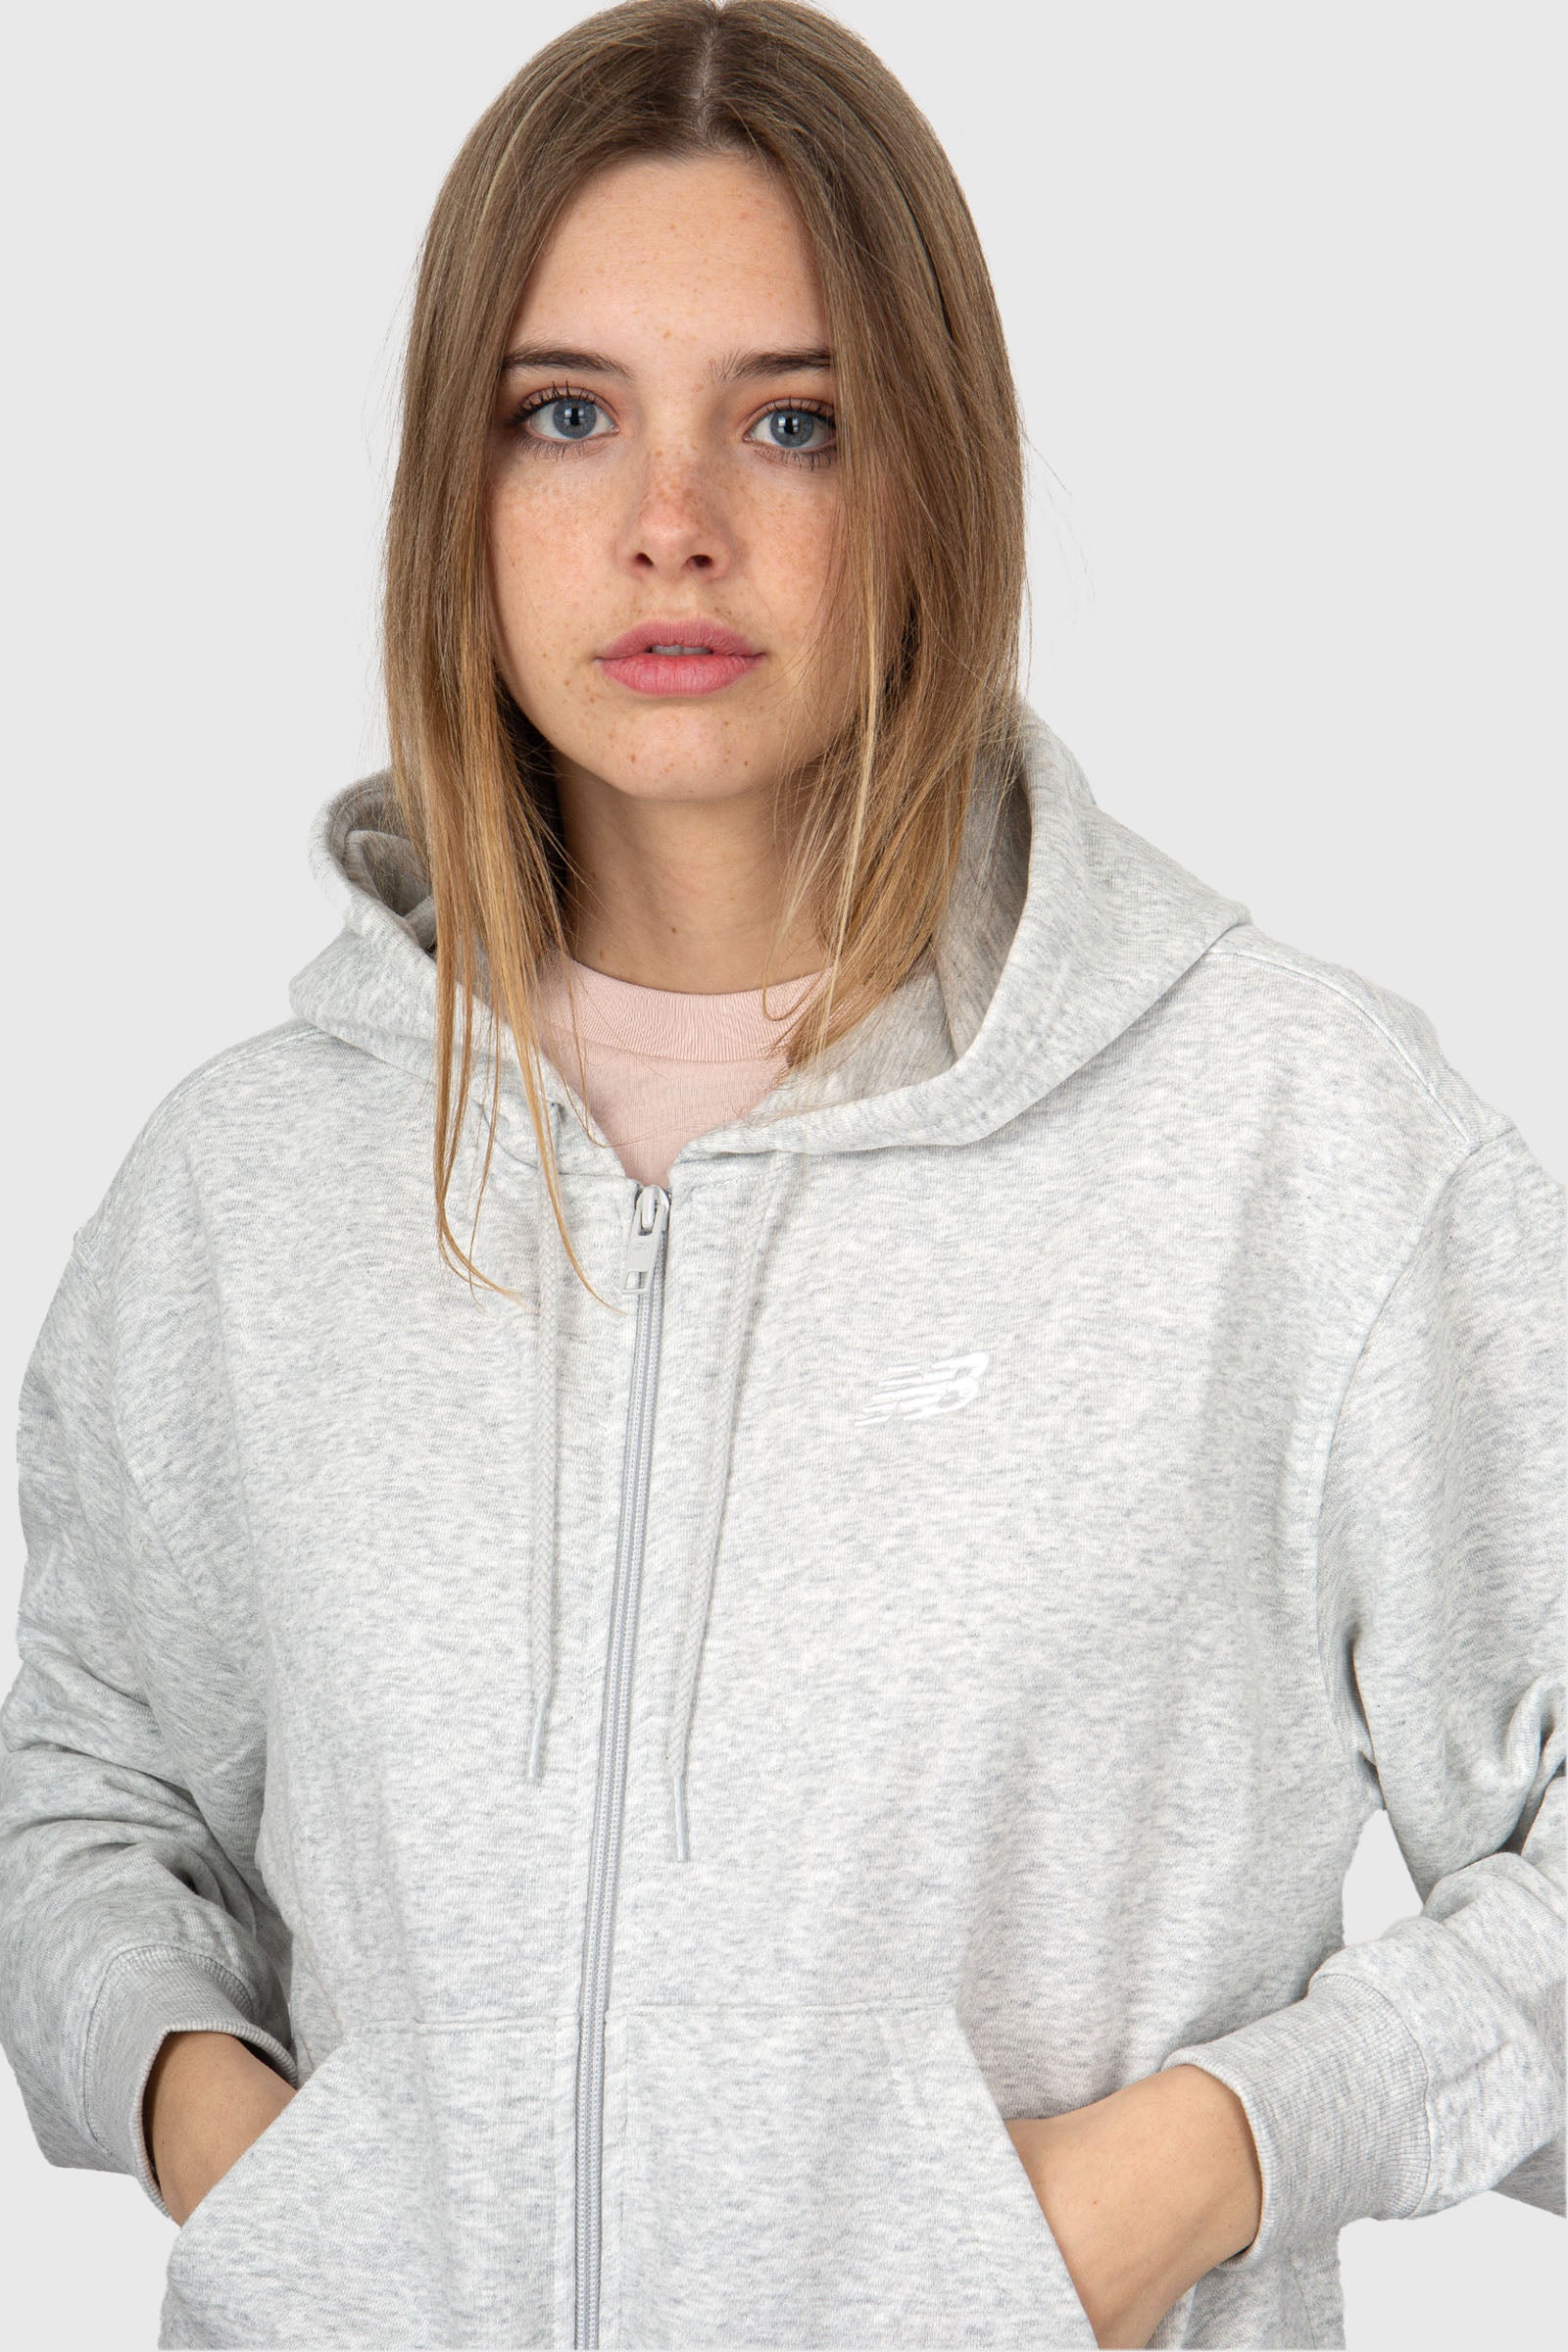 New Balance French Terry Full Zip Hoodie Cotton Light Grey - 1